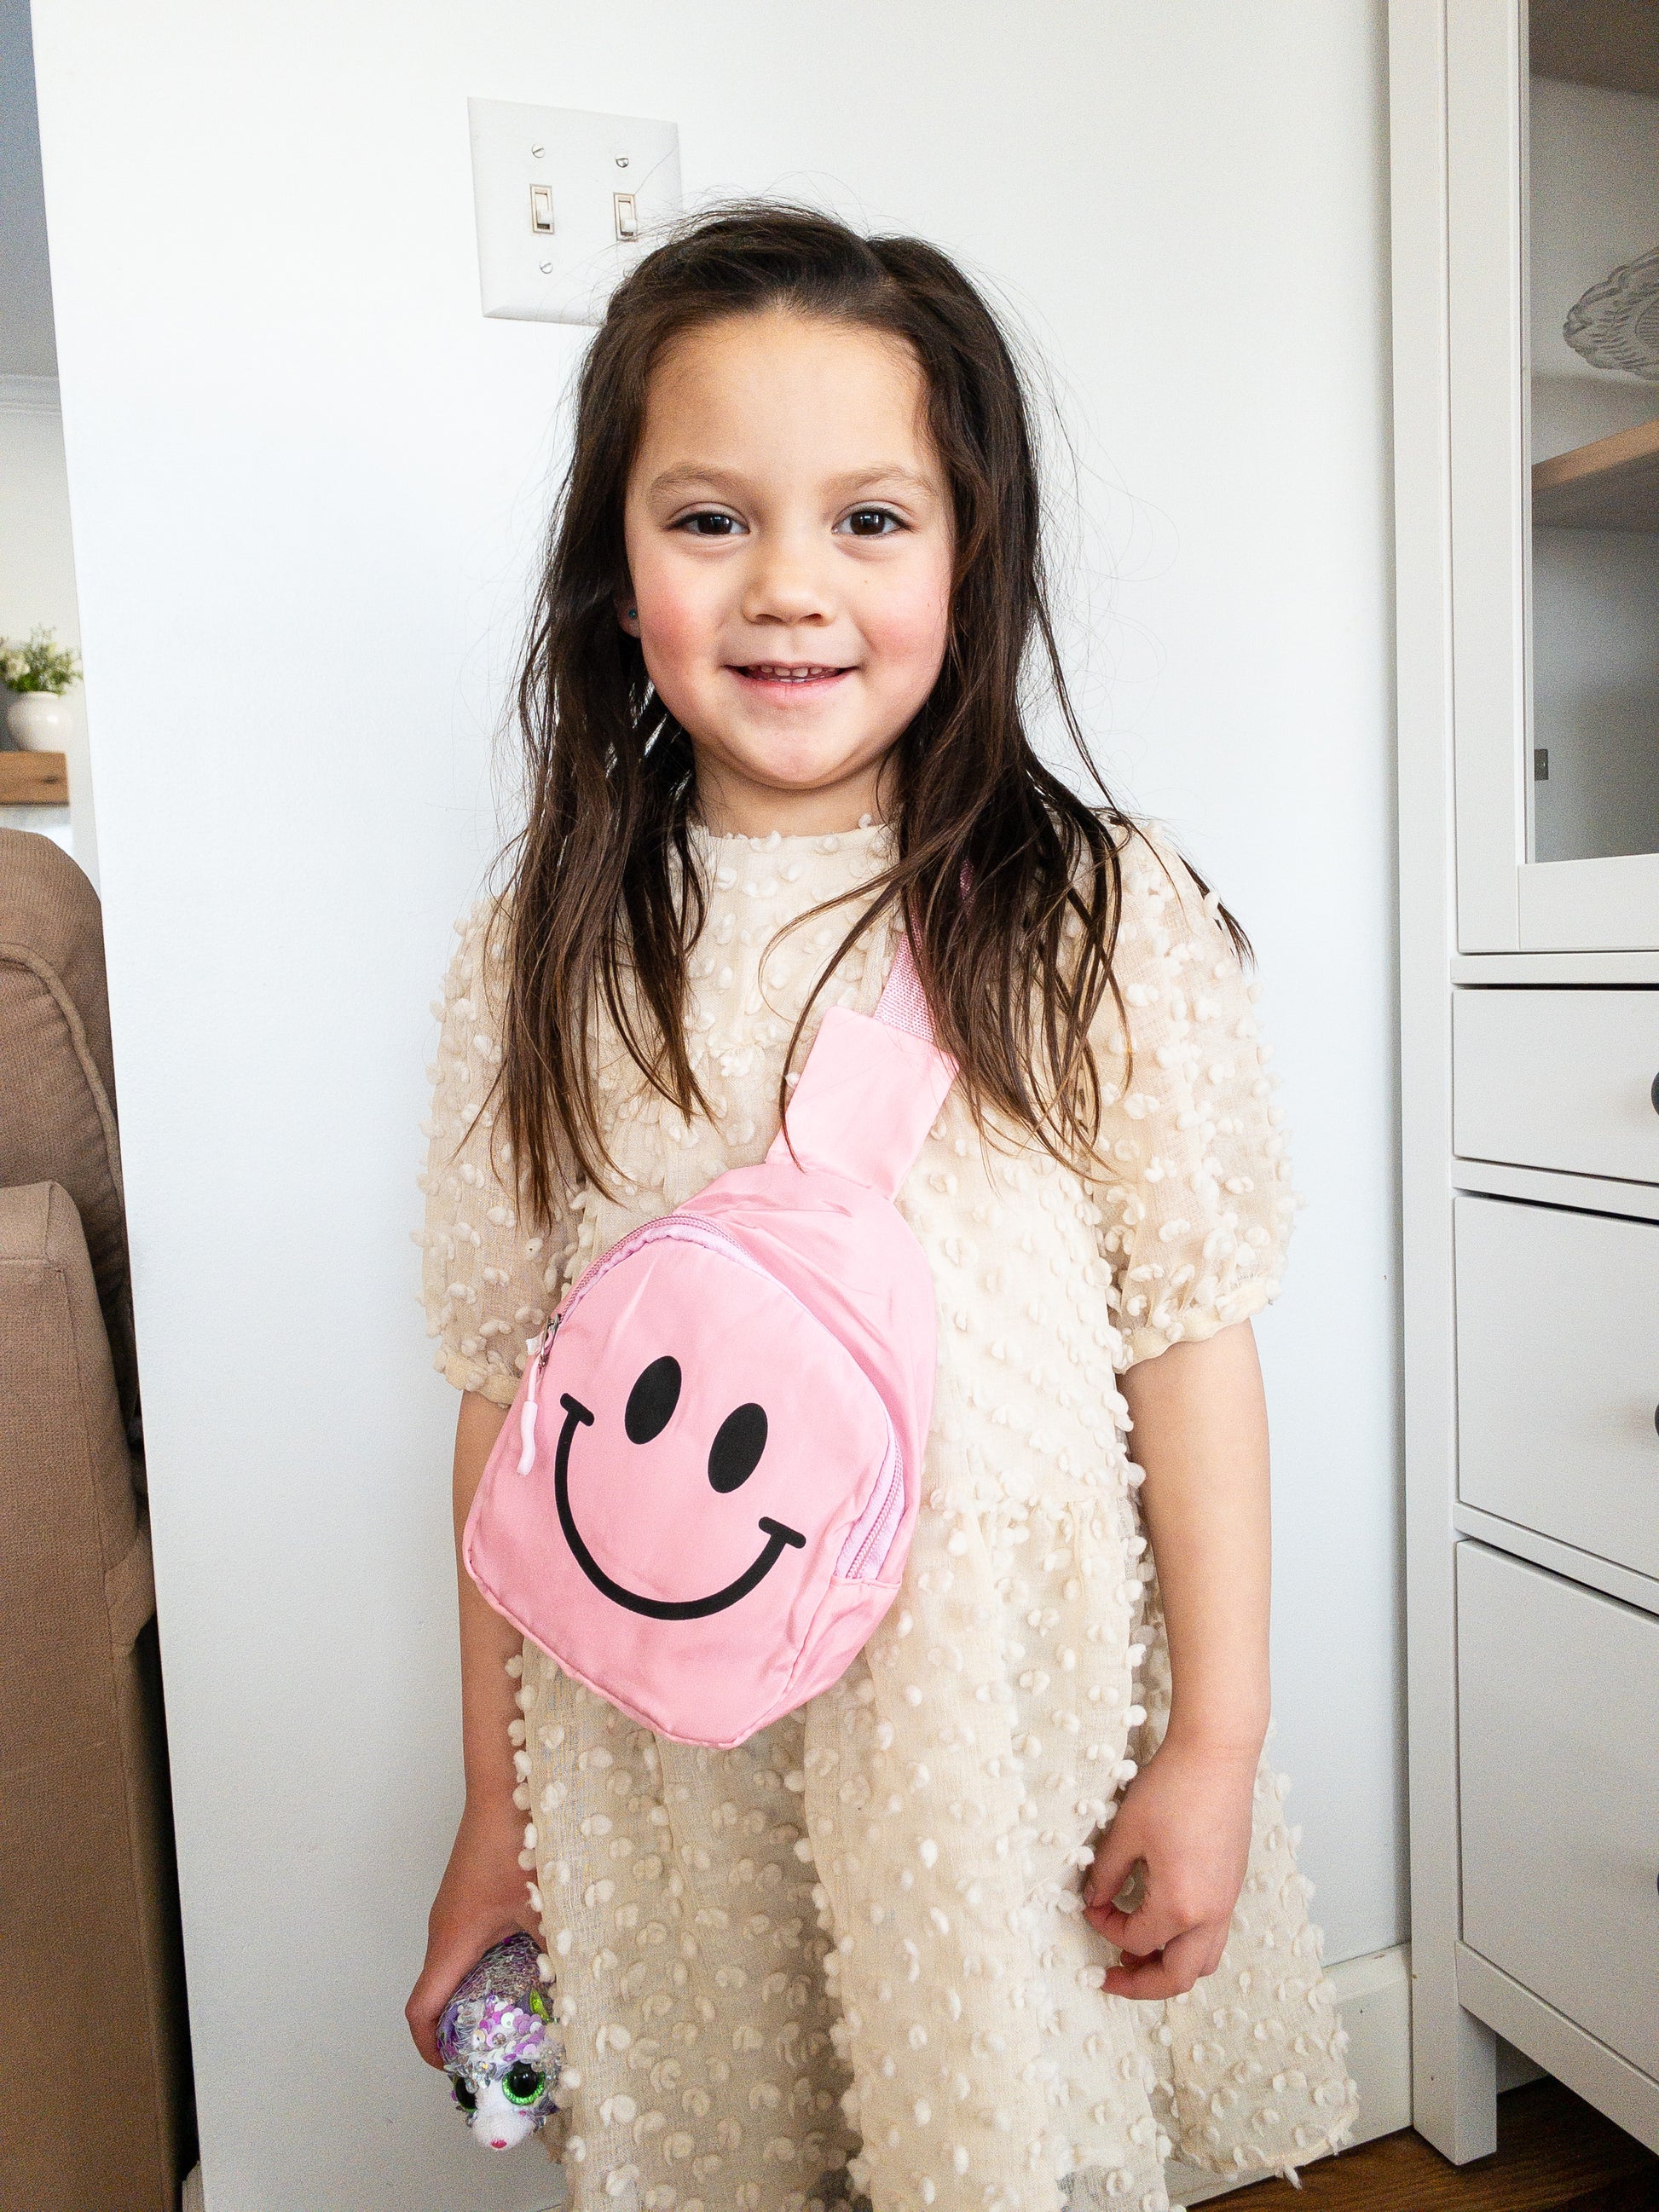 Just a slice of instant happiness. This cute smiley face crossbody or slingback bag is the perfect size for kids. It has a cable cord pull zipper which opens up to a single compartment and is super lightweight with adjustable straps. Wear it front or back.